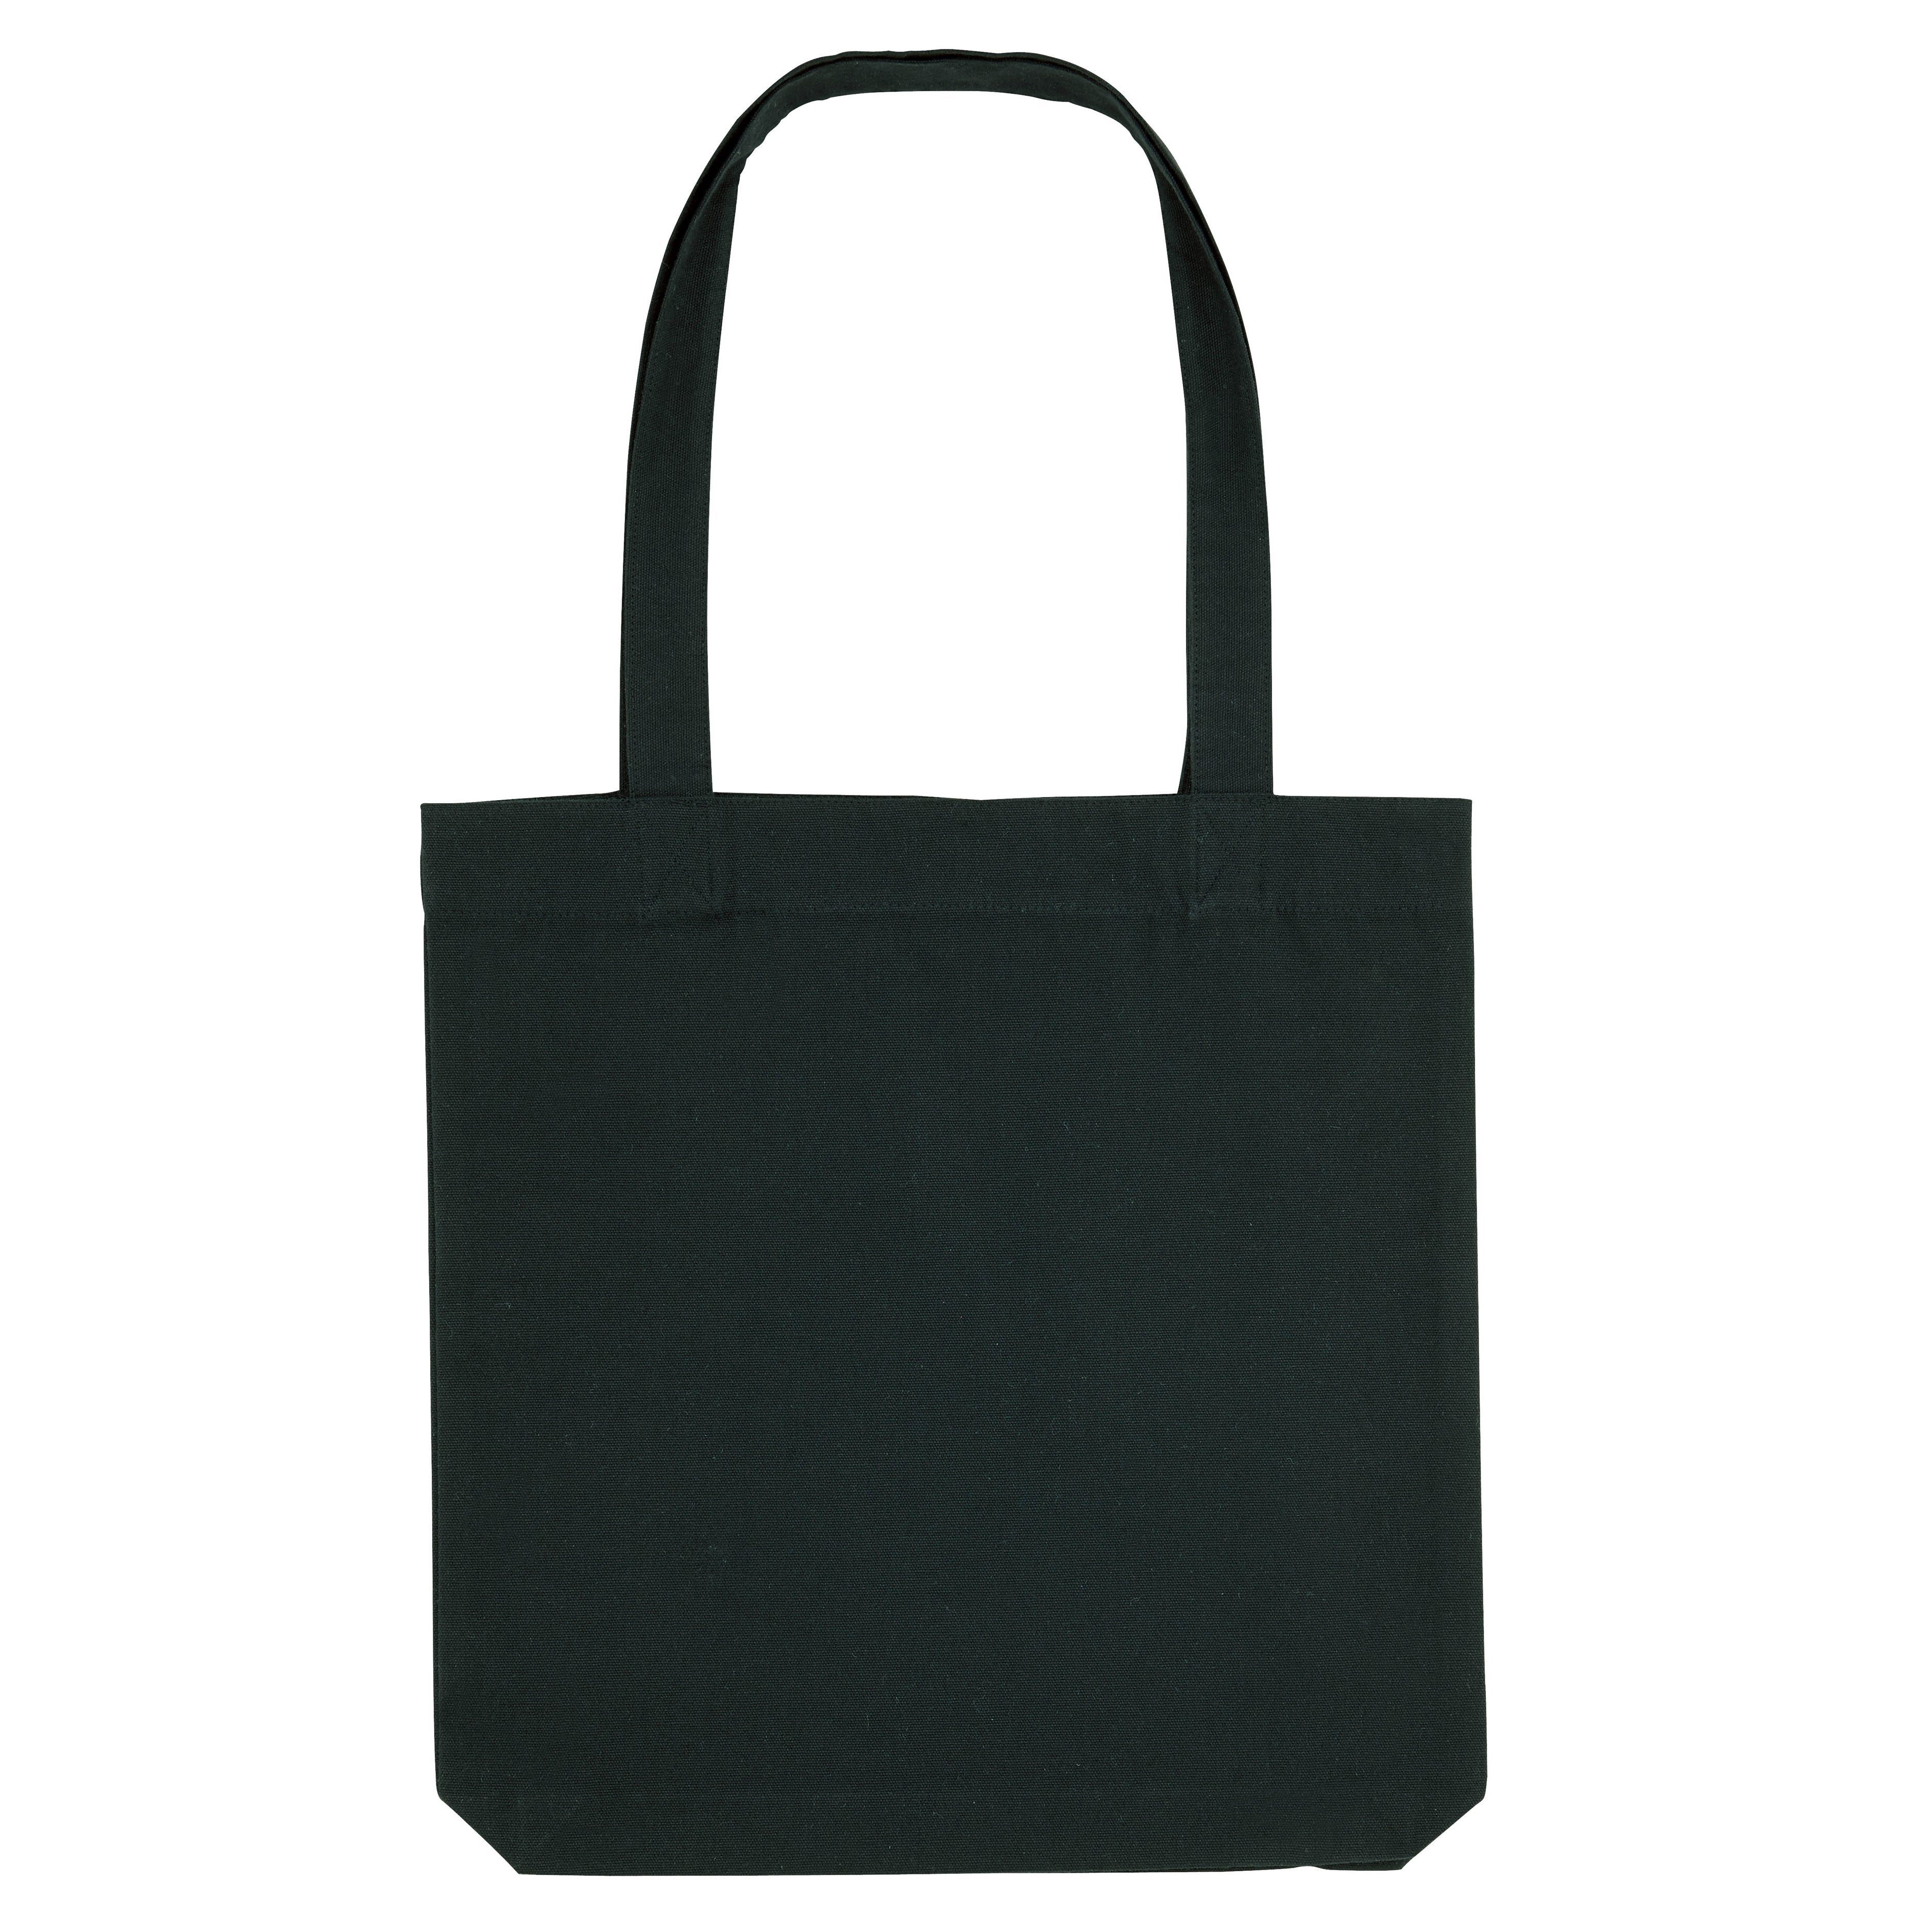 HAPPY YOU EXIST TOTE BAG BLACK - IVORY WORLD